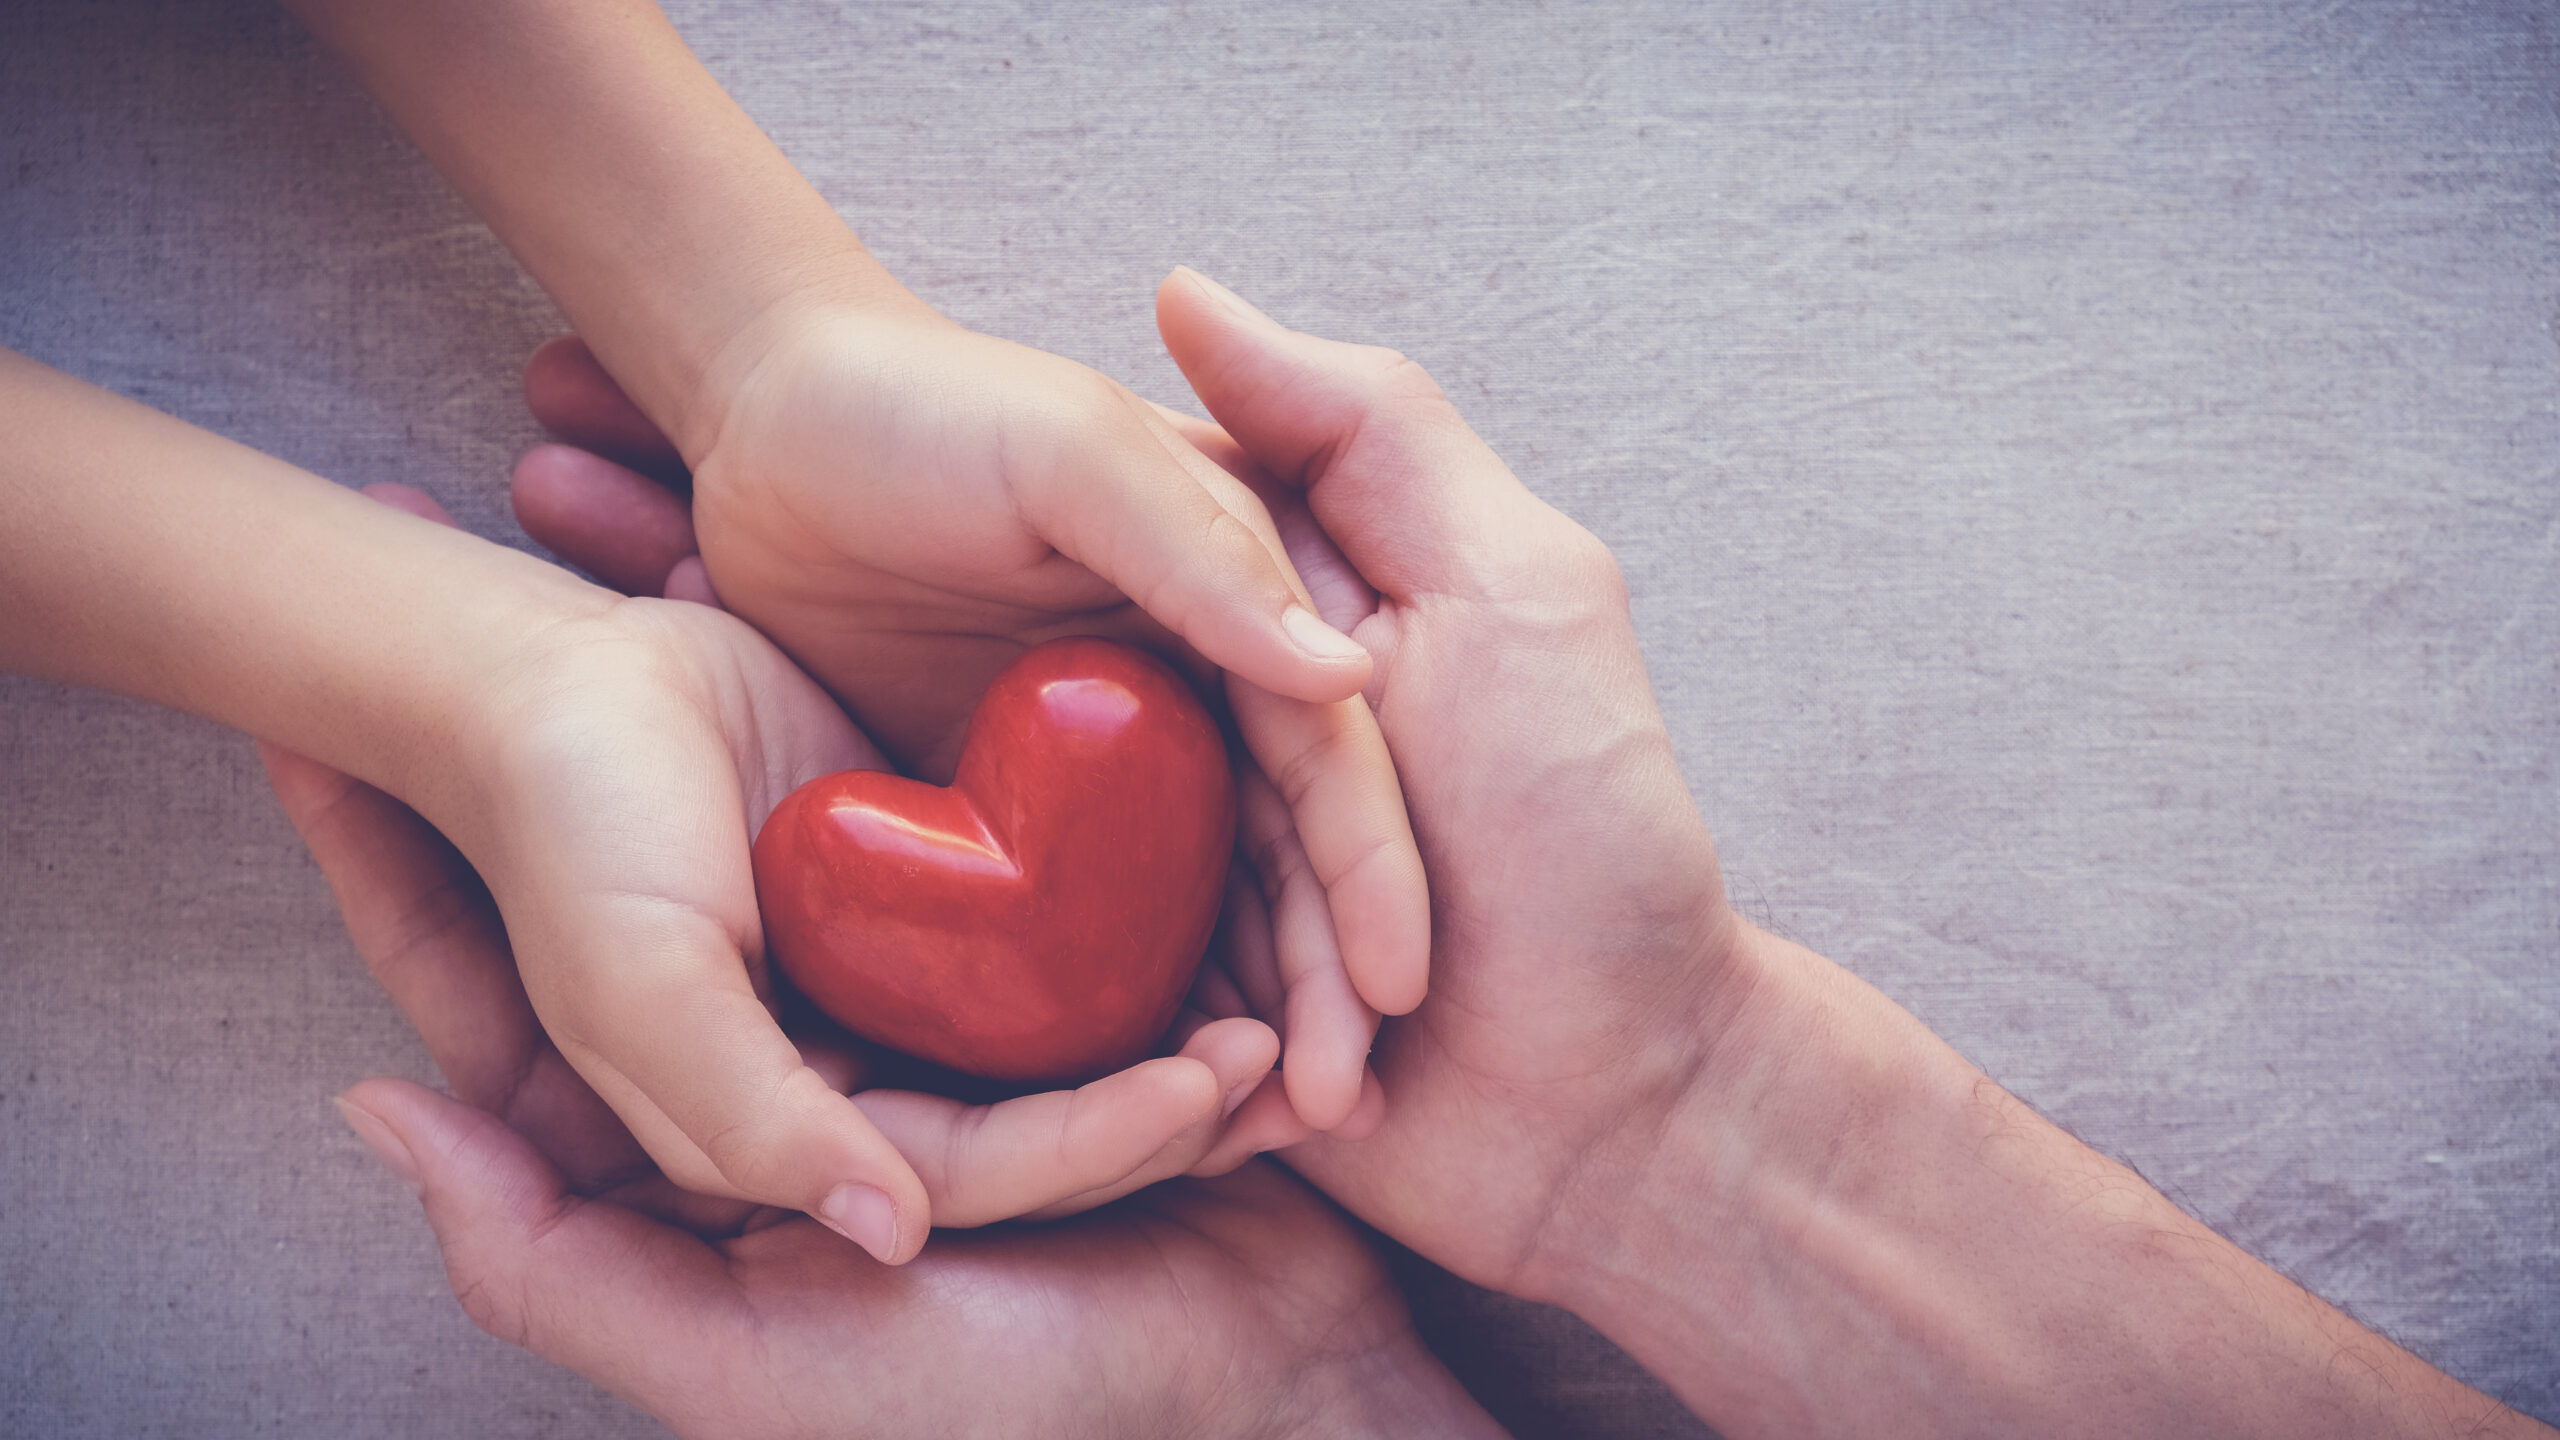 5 Things to Consider During Donate Life Awareness Month